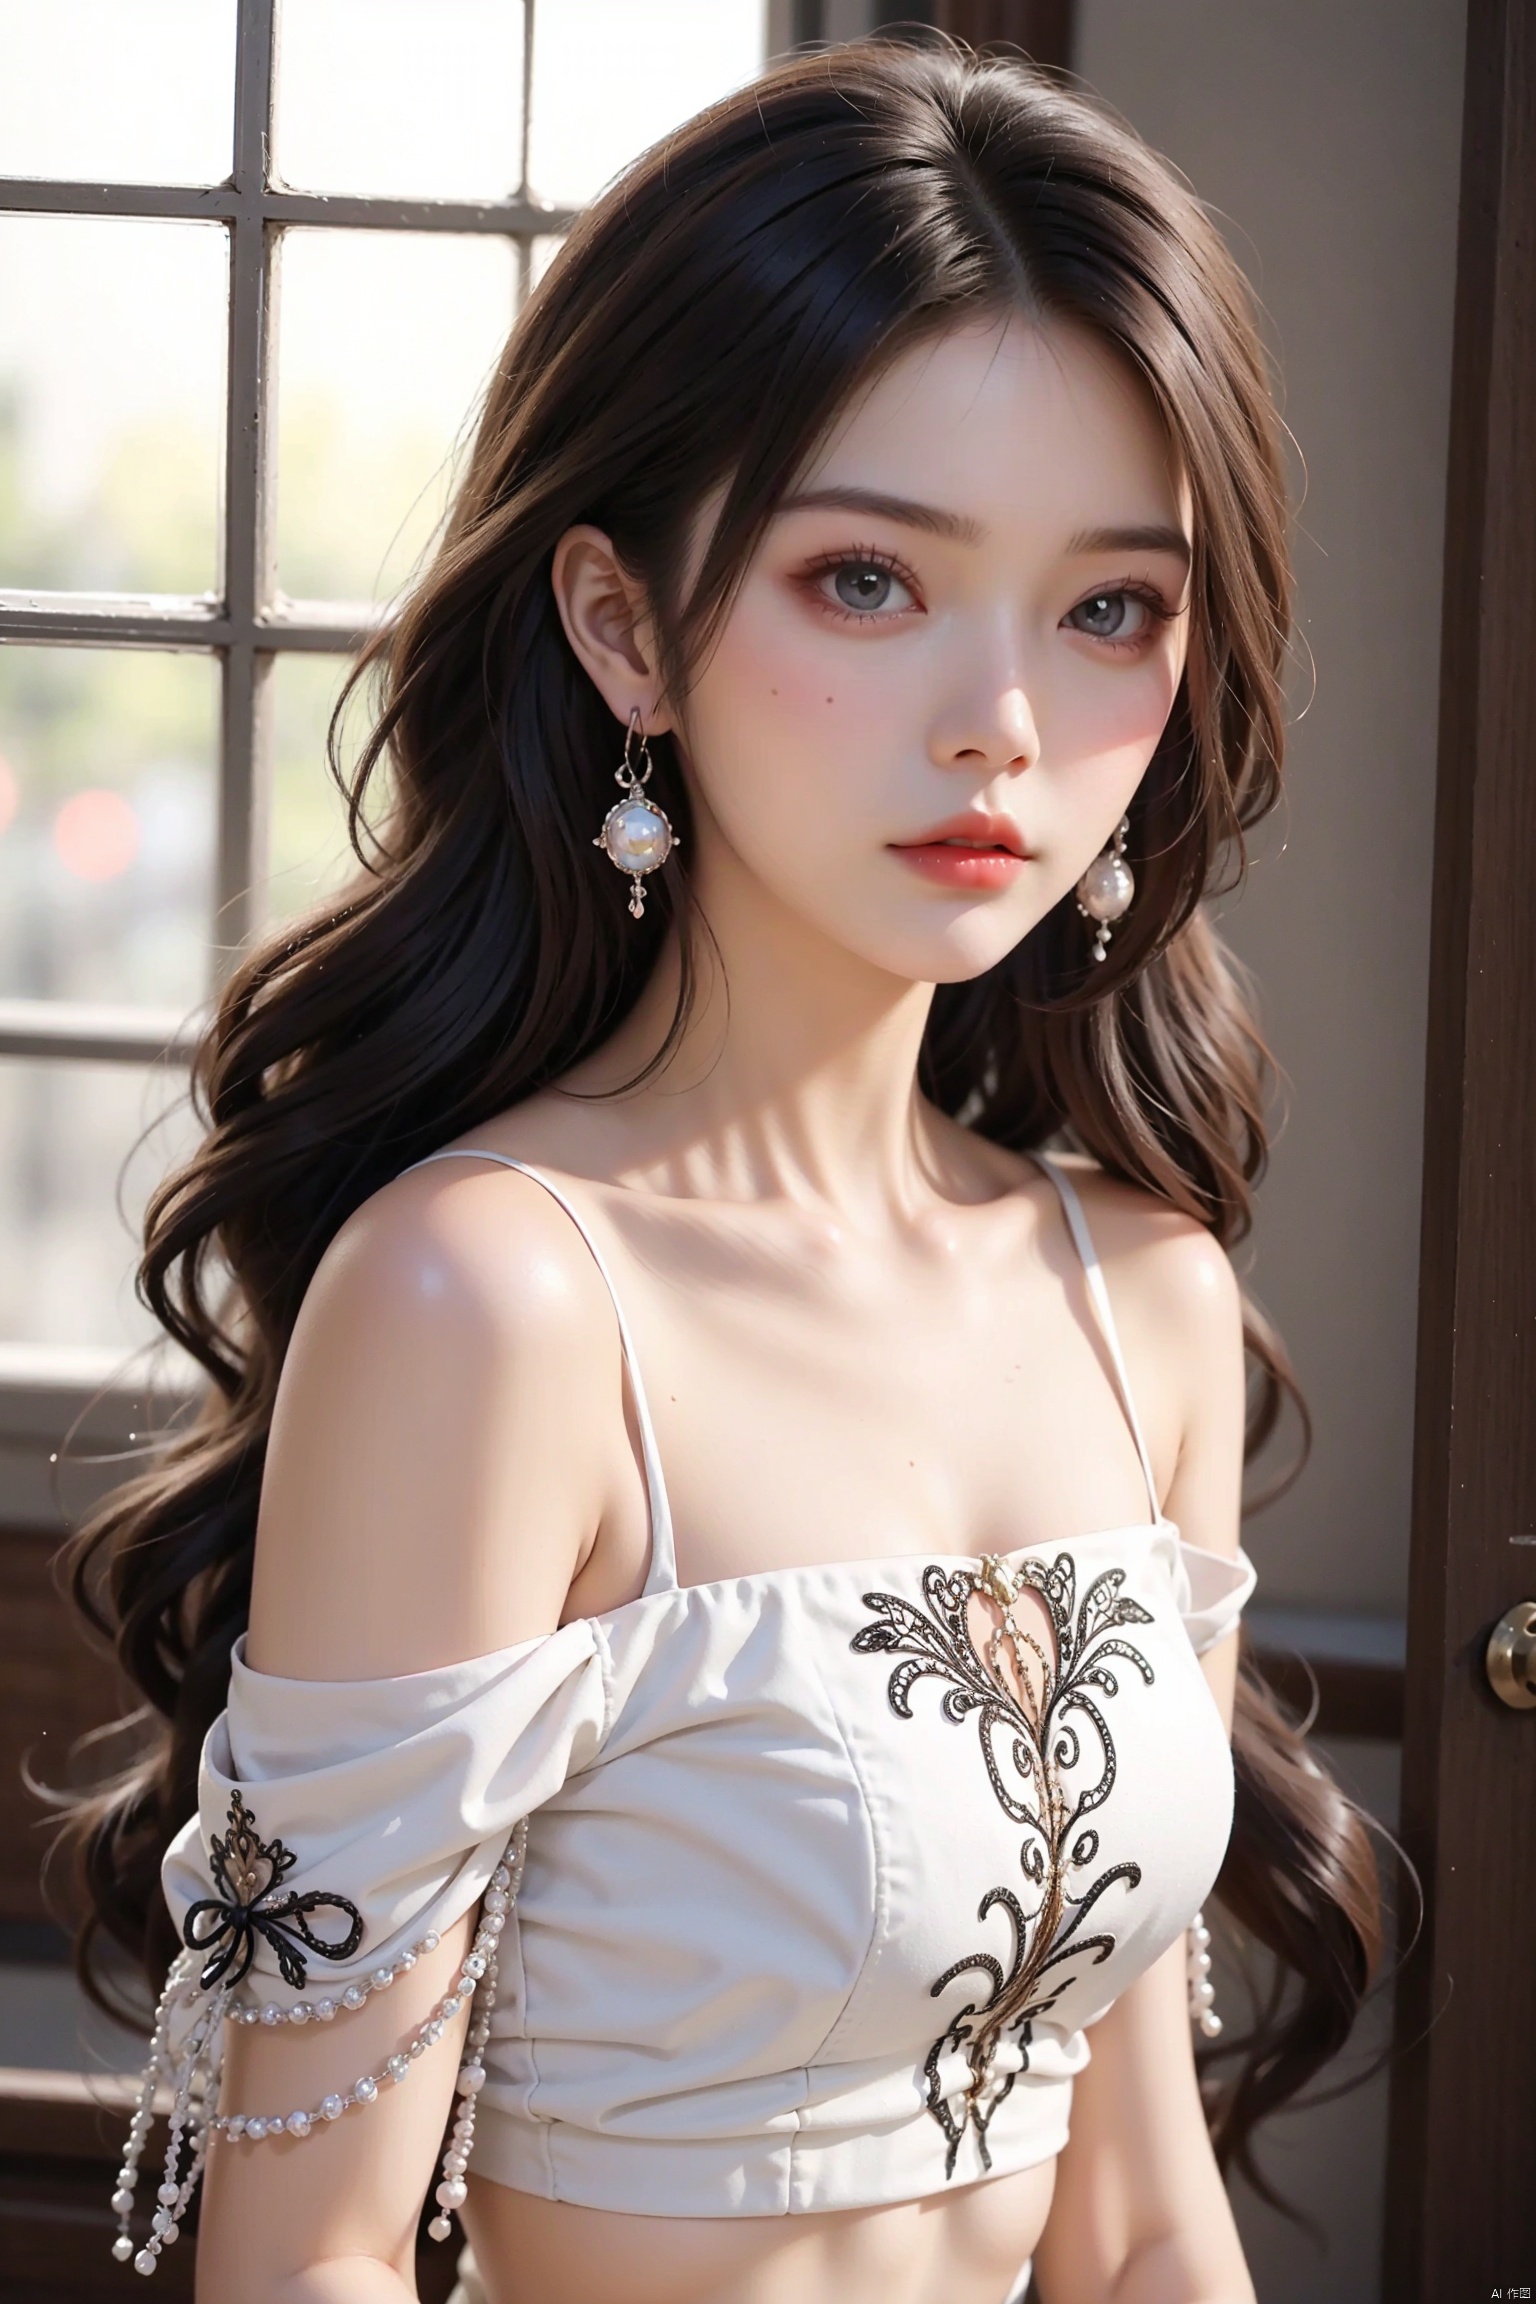  chinese_paper_cut,Anime Style,a beautiful girl,24yo,skinny,pretty,closed mouth,serious,k-pop:detailed beautiful face,detailed eyes:0.6,dark red lips,body art,Polished,looking over one shoulder,BREAK,sunlight,wind,dark style,crop top,upper body:0.778,The Evil Within